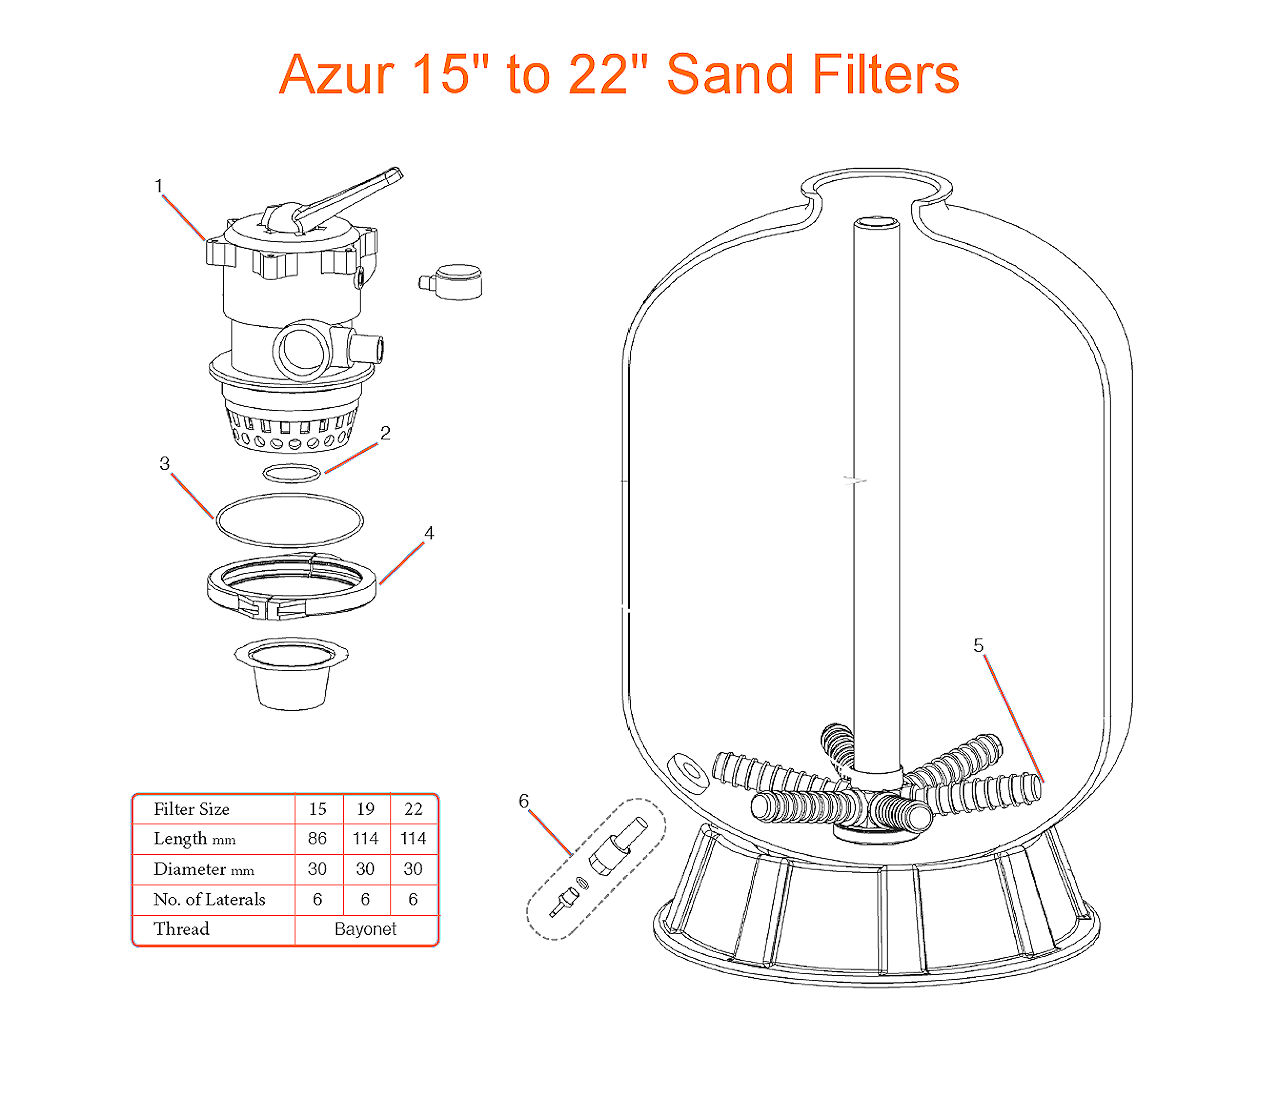 Azur 15 to 22 Sand filter spares